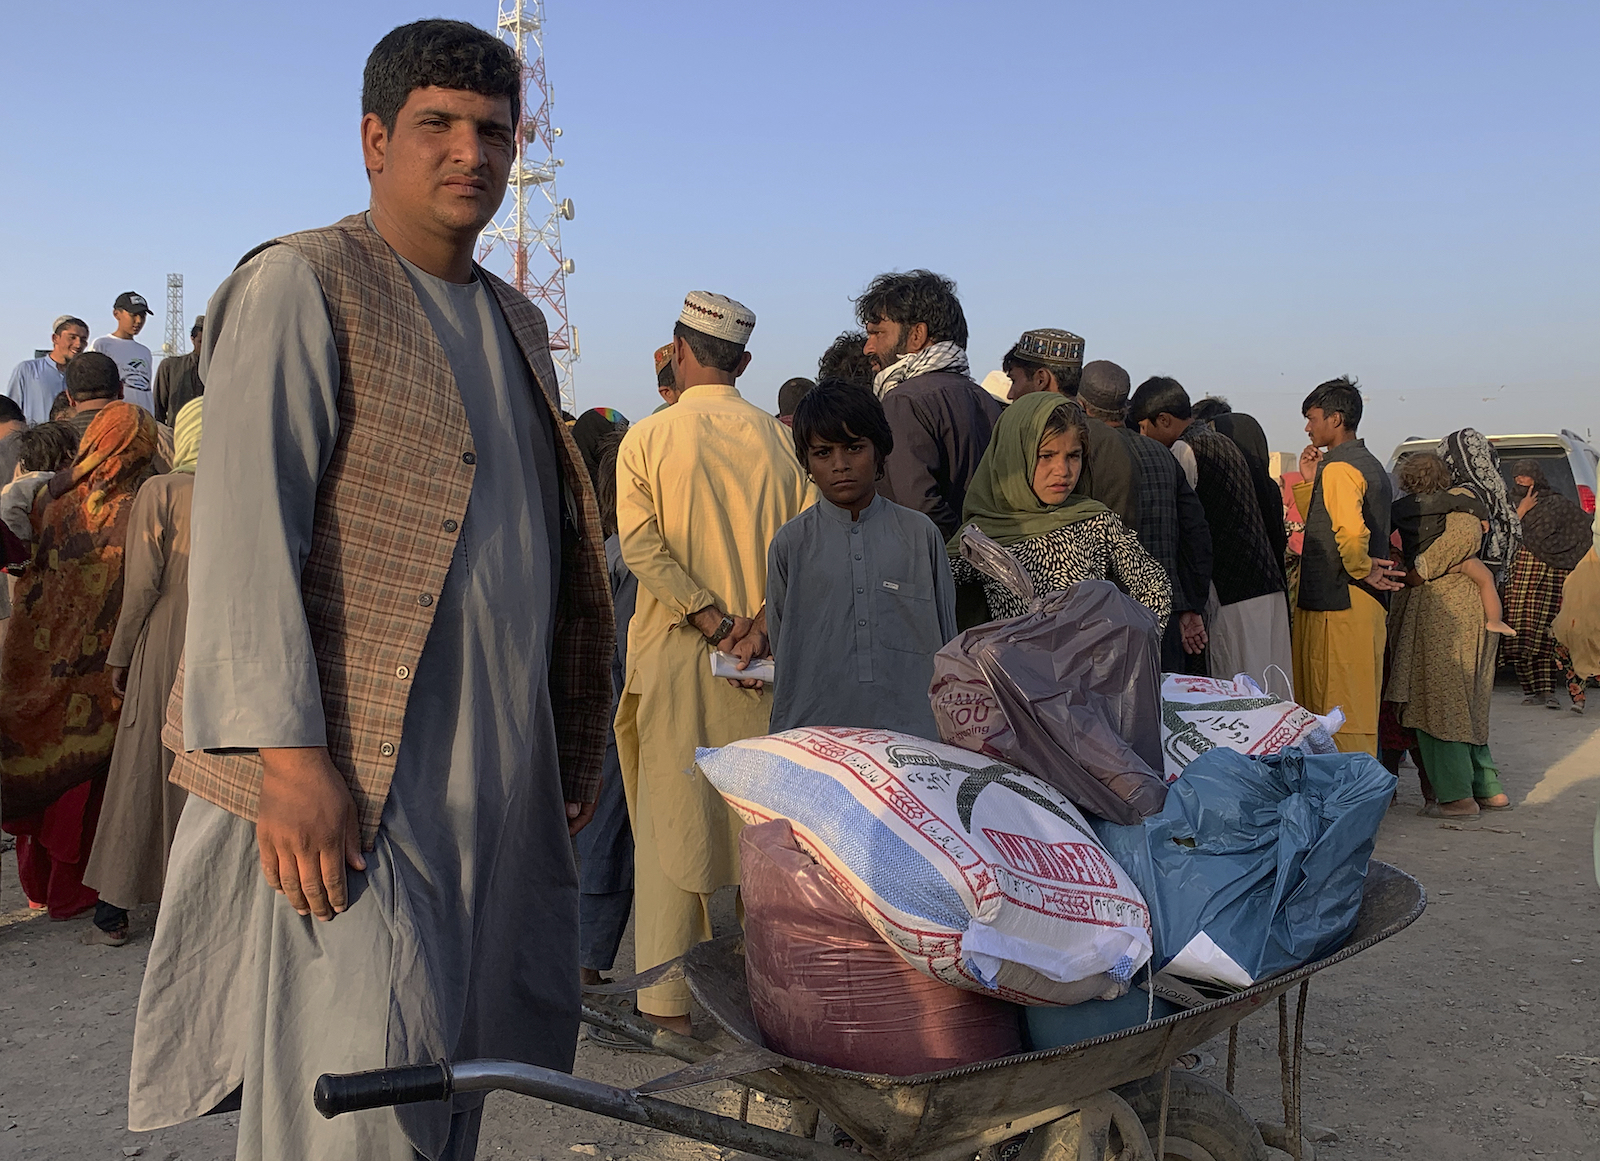 An Afghan man prepares to push a wheelbarrow with foodstuff distributed by an Islamabad-based Christian organization on the outskirts of Chaman, a border town in Pakistan’s southwestern Baluchistan province, Aug. 31, 2021. Dozens of Afghan families crossed into Pakistan through the southwestern Chaman border a day after the U.S. wrapped up its 20-year military presence in the Taliban-controlled country. (AP Photo)